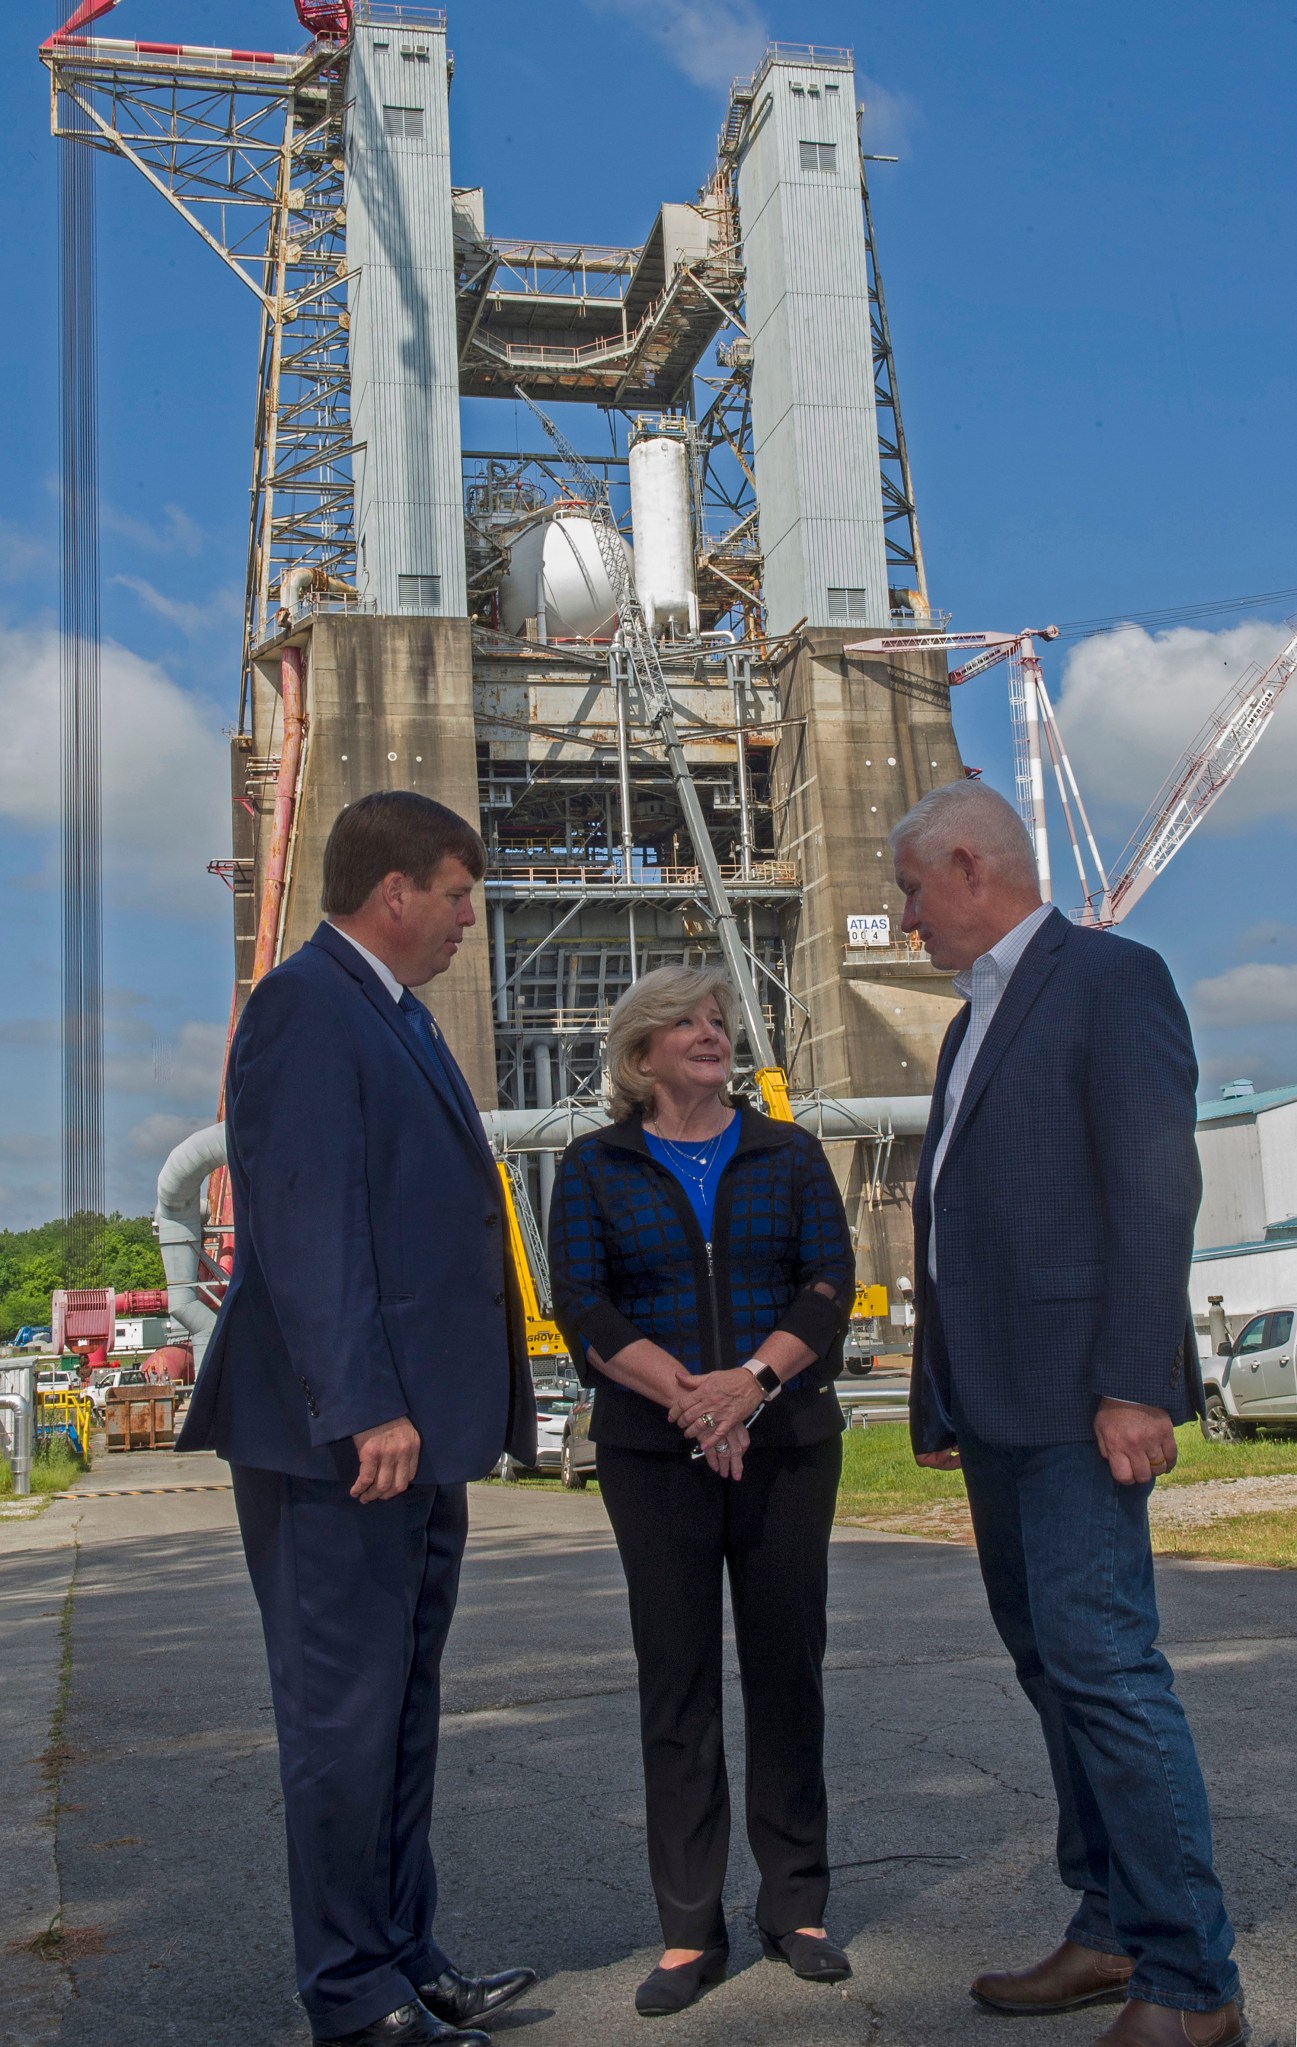 Jody Singer, center, and Dale Strong, left, meet with Terry Benedict, on May 20, in front of historic Test Stand 4670.